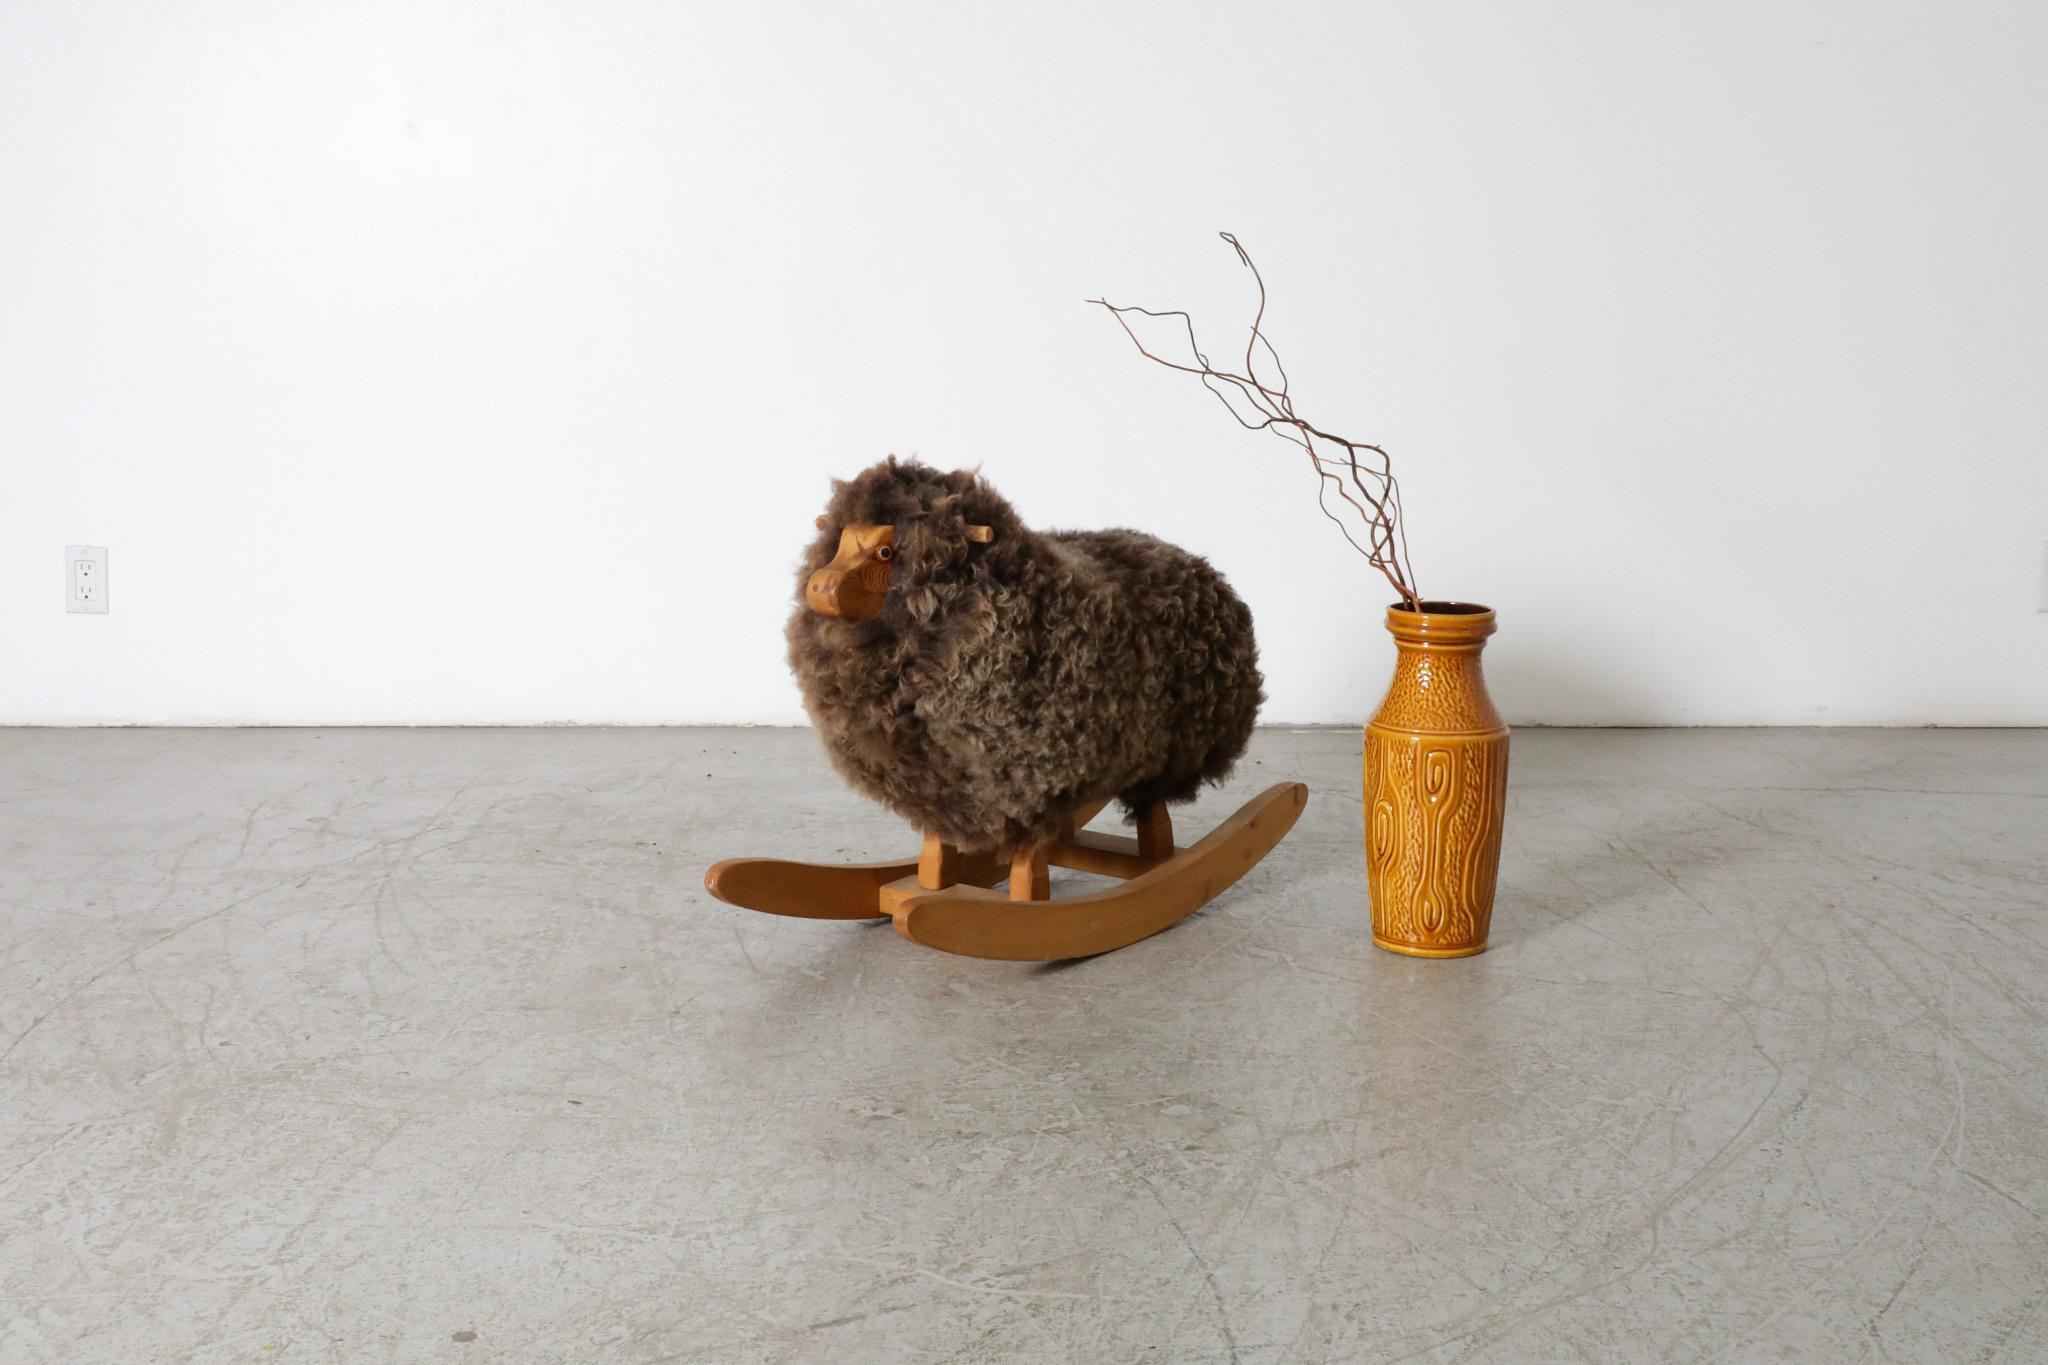 Cute mid-century rocking sheep with real sheep coat, carved wood face and rocker.  A vintage room accessory perfect for adding a little life and style to any room! In original condition with some visible wear consistent with age and light use. 